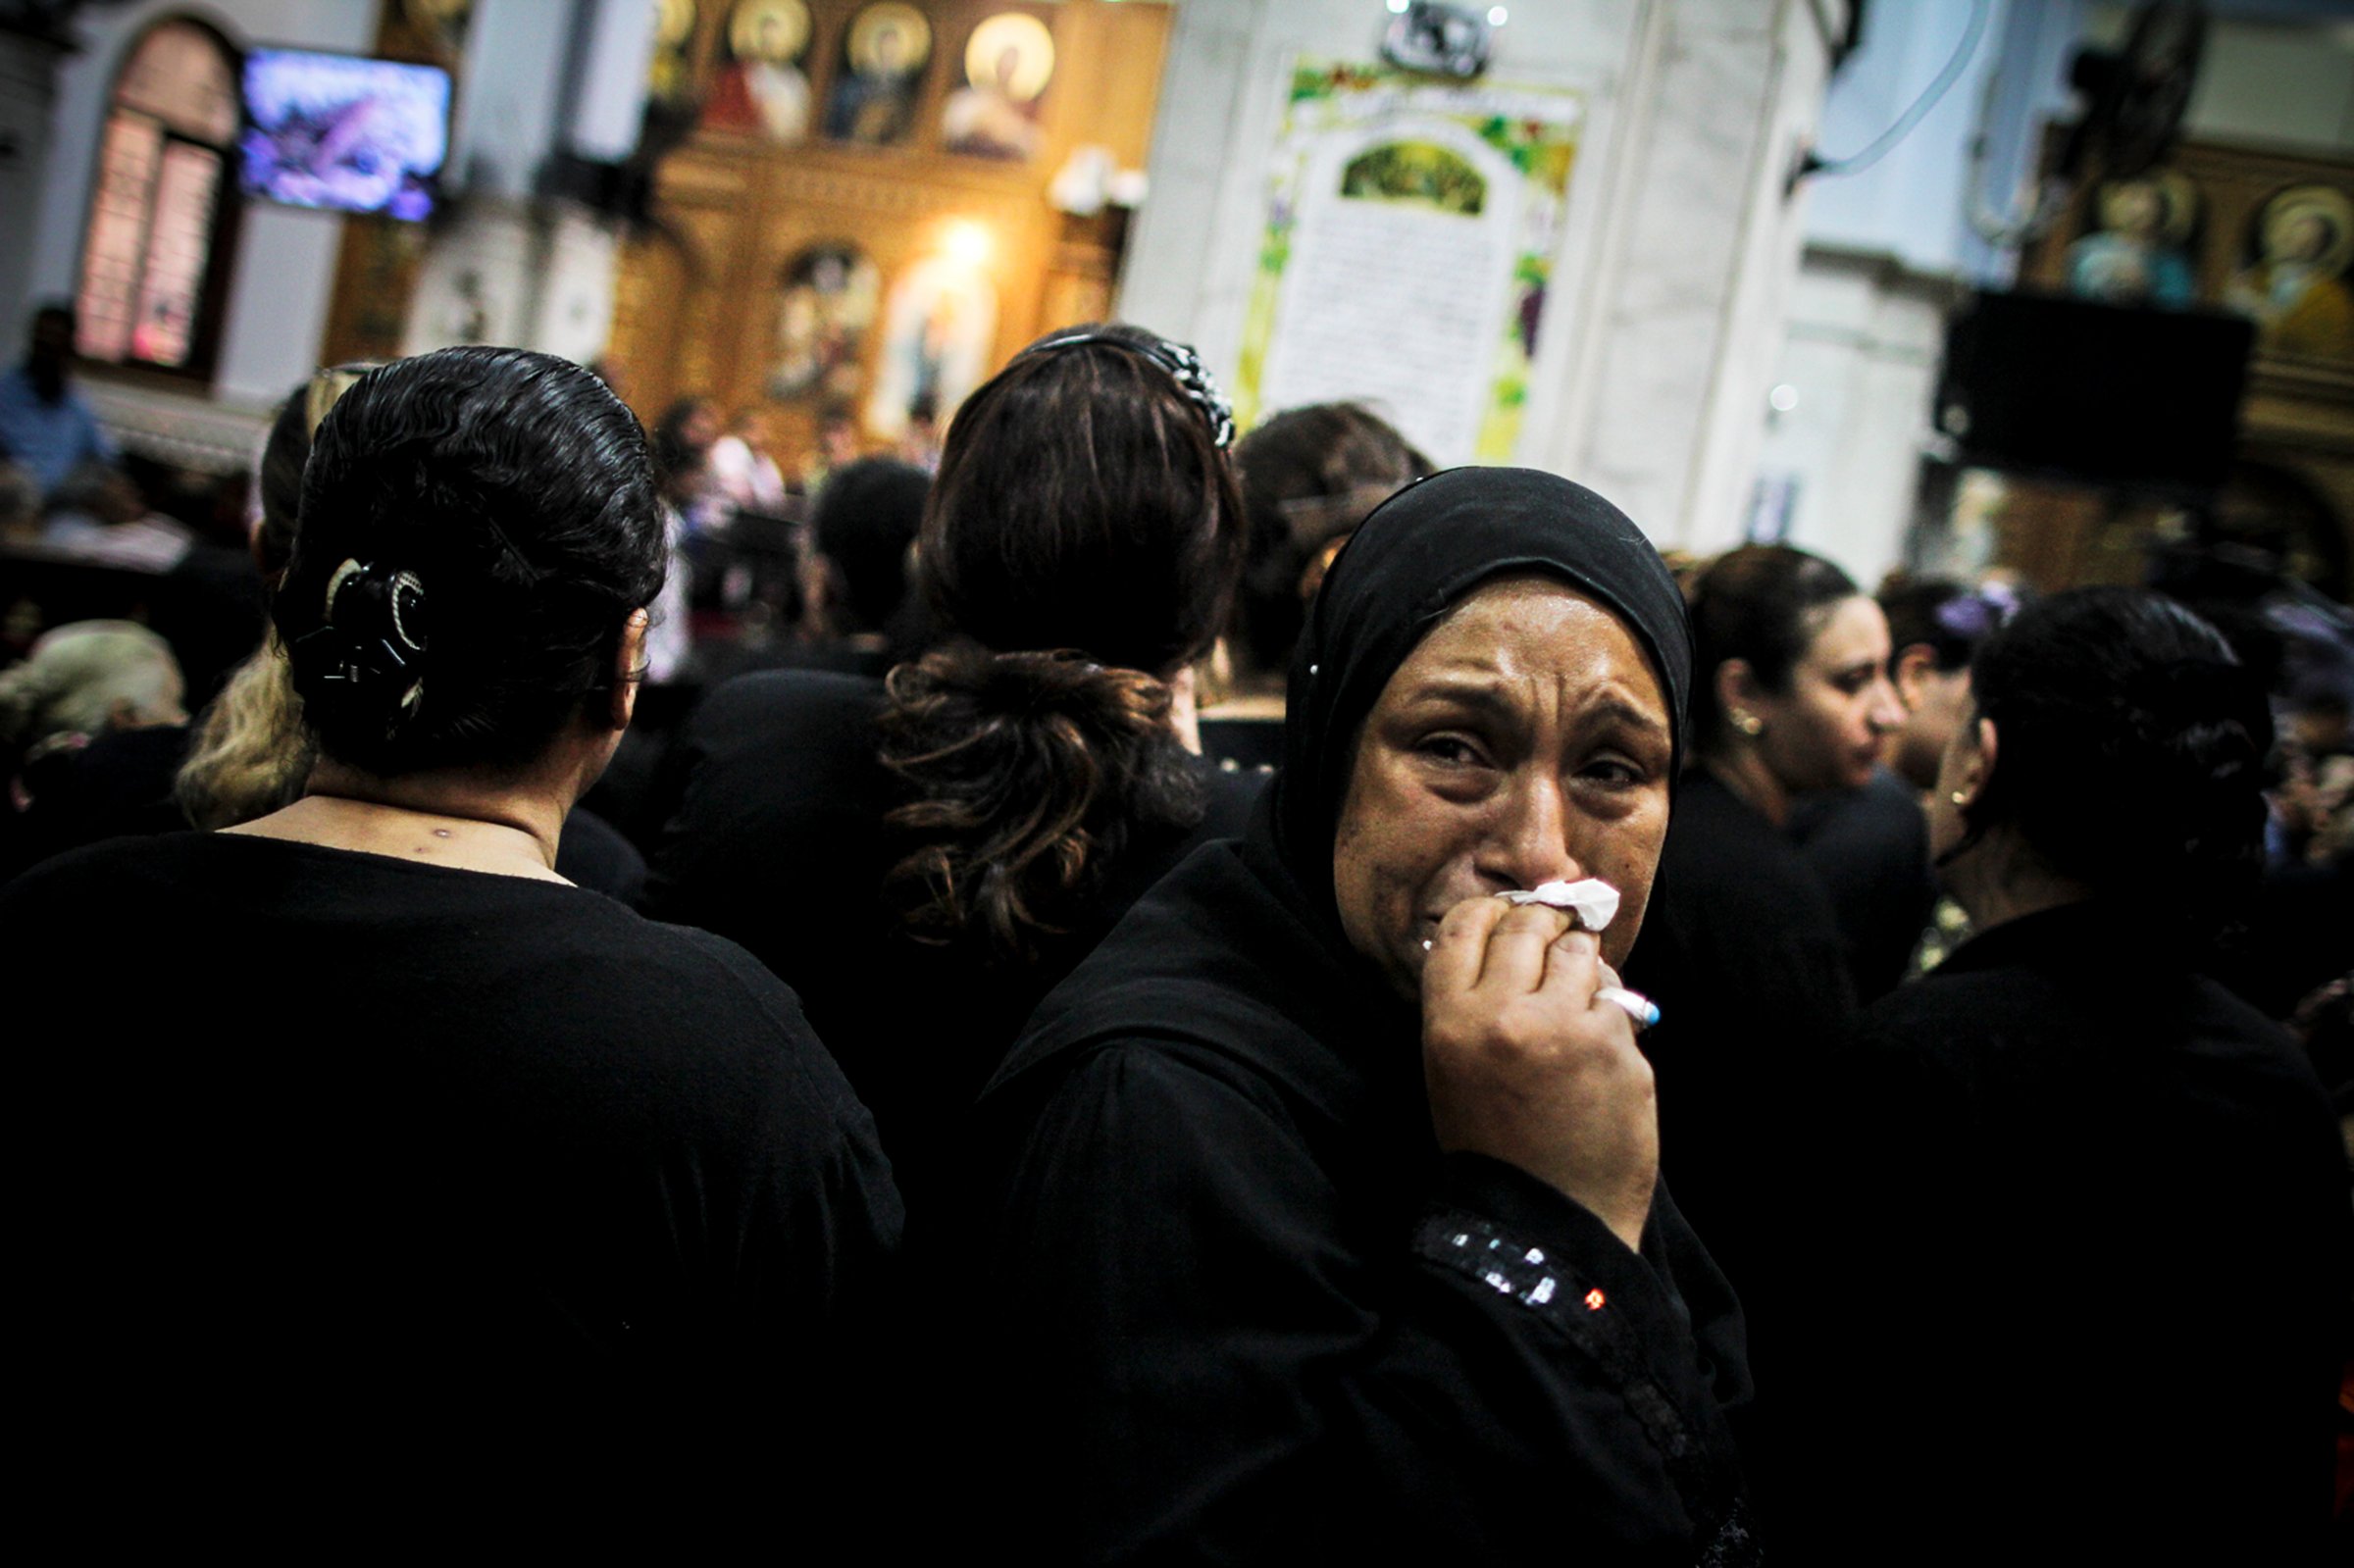 A mourner at the funeral of four Egyptian Christians killed in a drive-by shooting